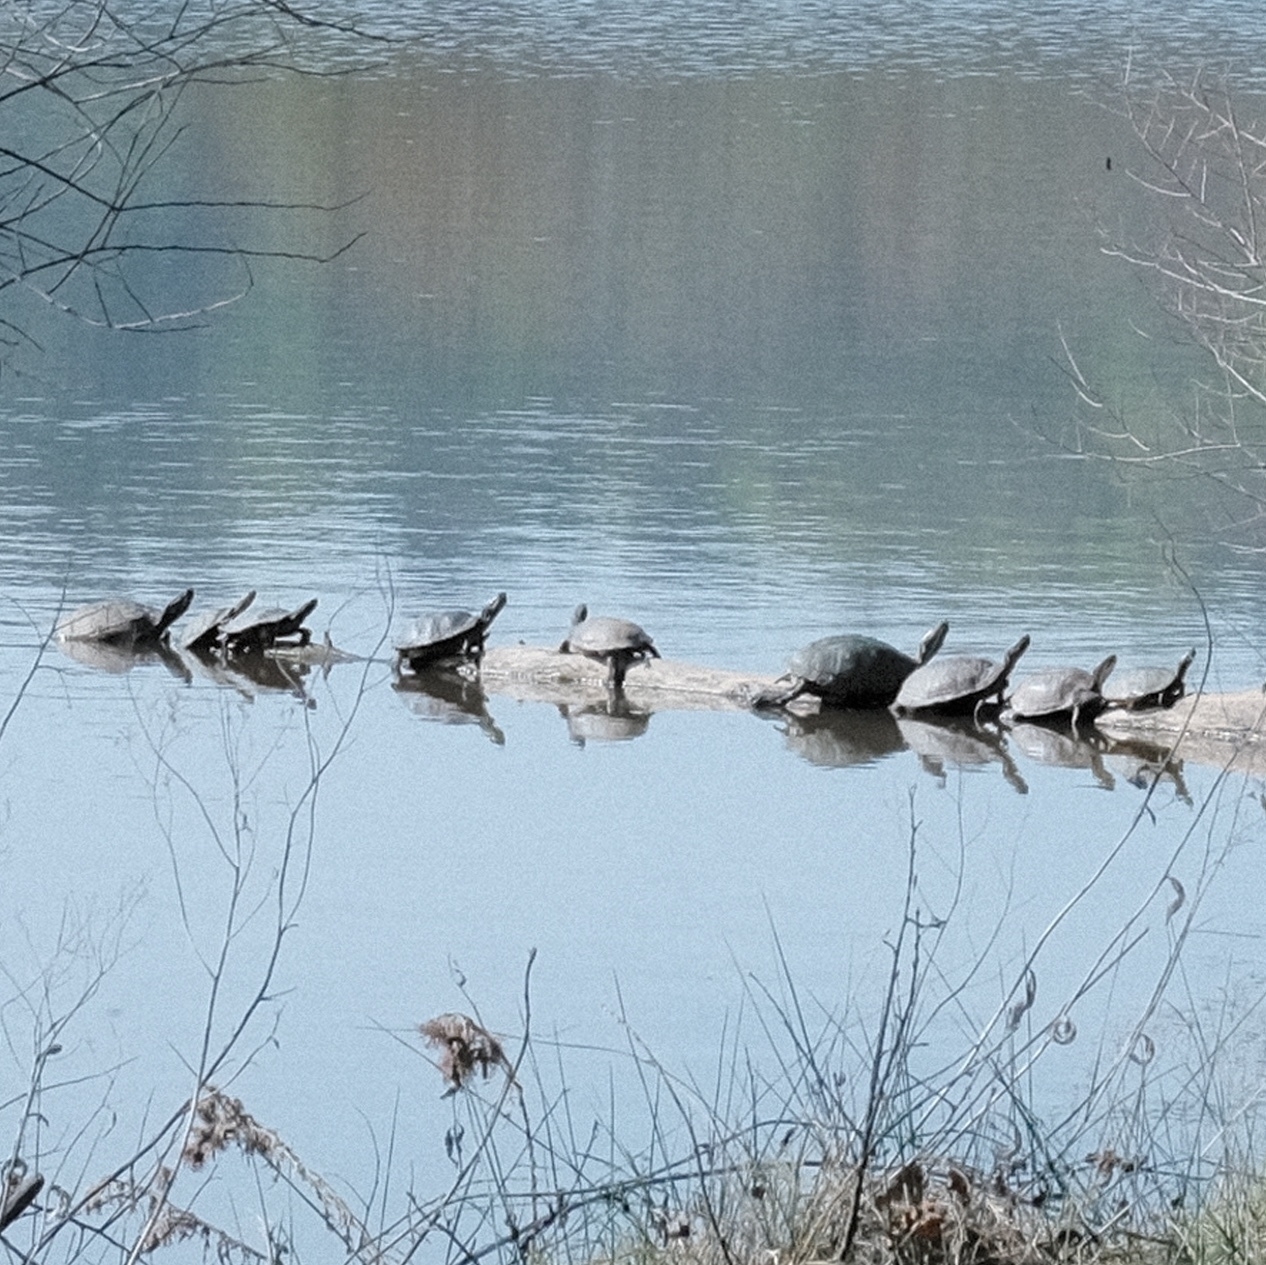 many turtles sunning on a log in a small lake